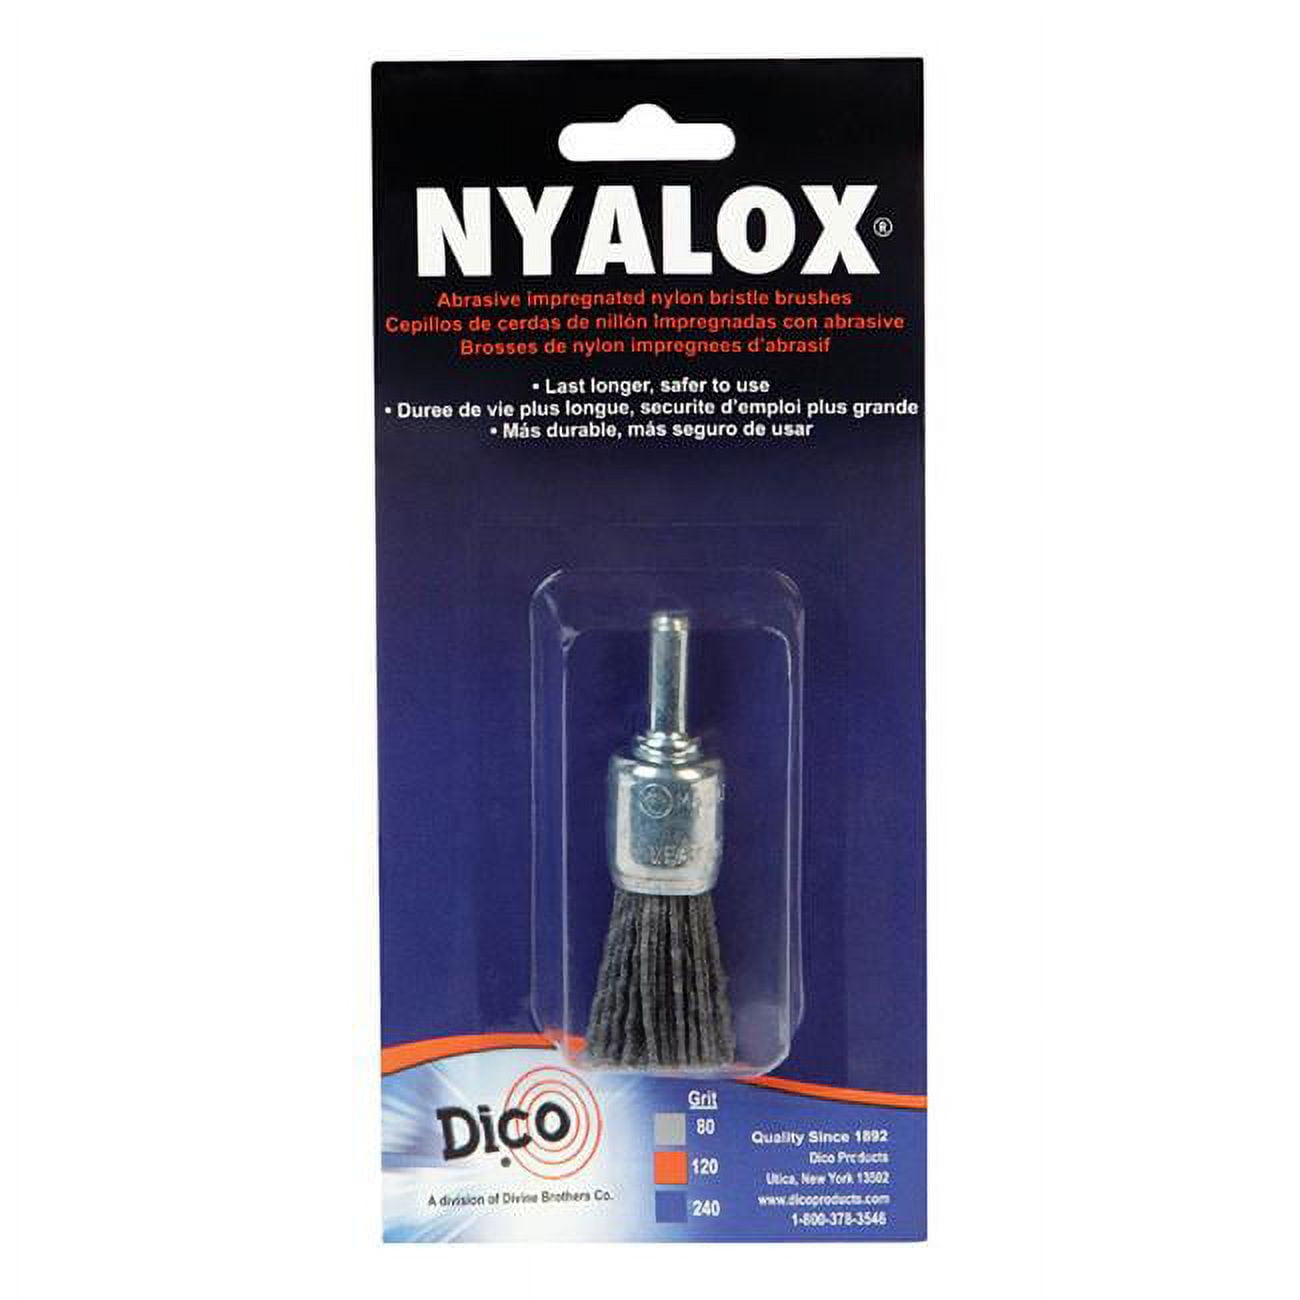 541-775-3 By 4 3 In. Nyalox End Brush